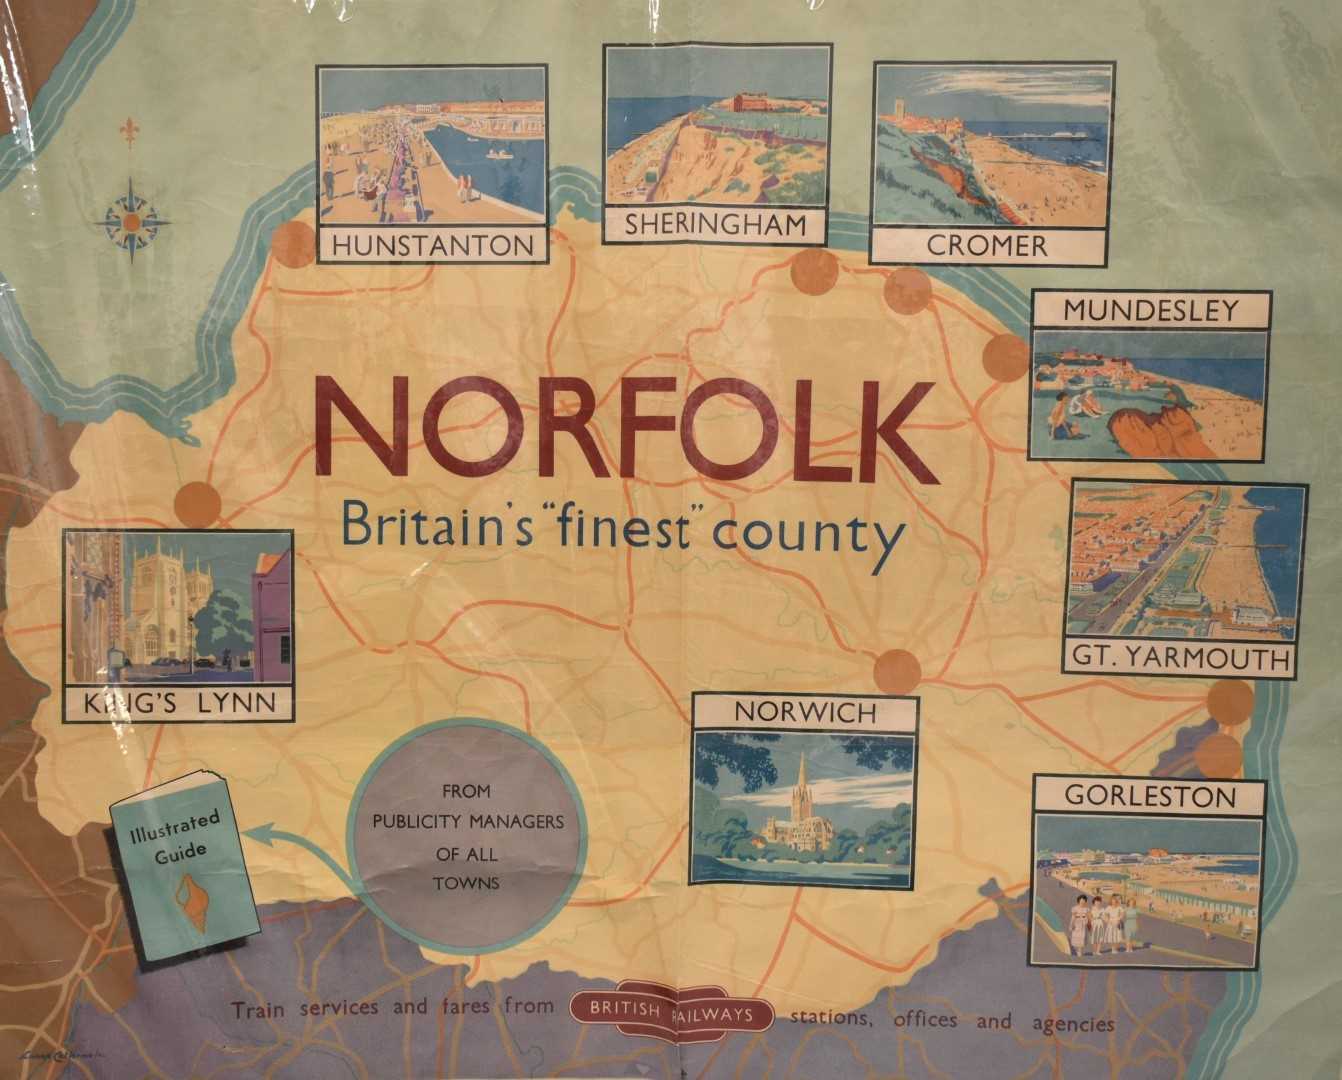 Lance Cattermole (1898-1992) vintage travel poster for Norfolk "Britains Finest County", published b